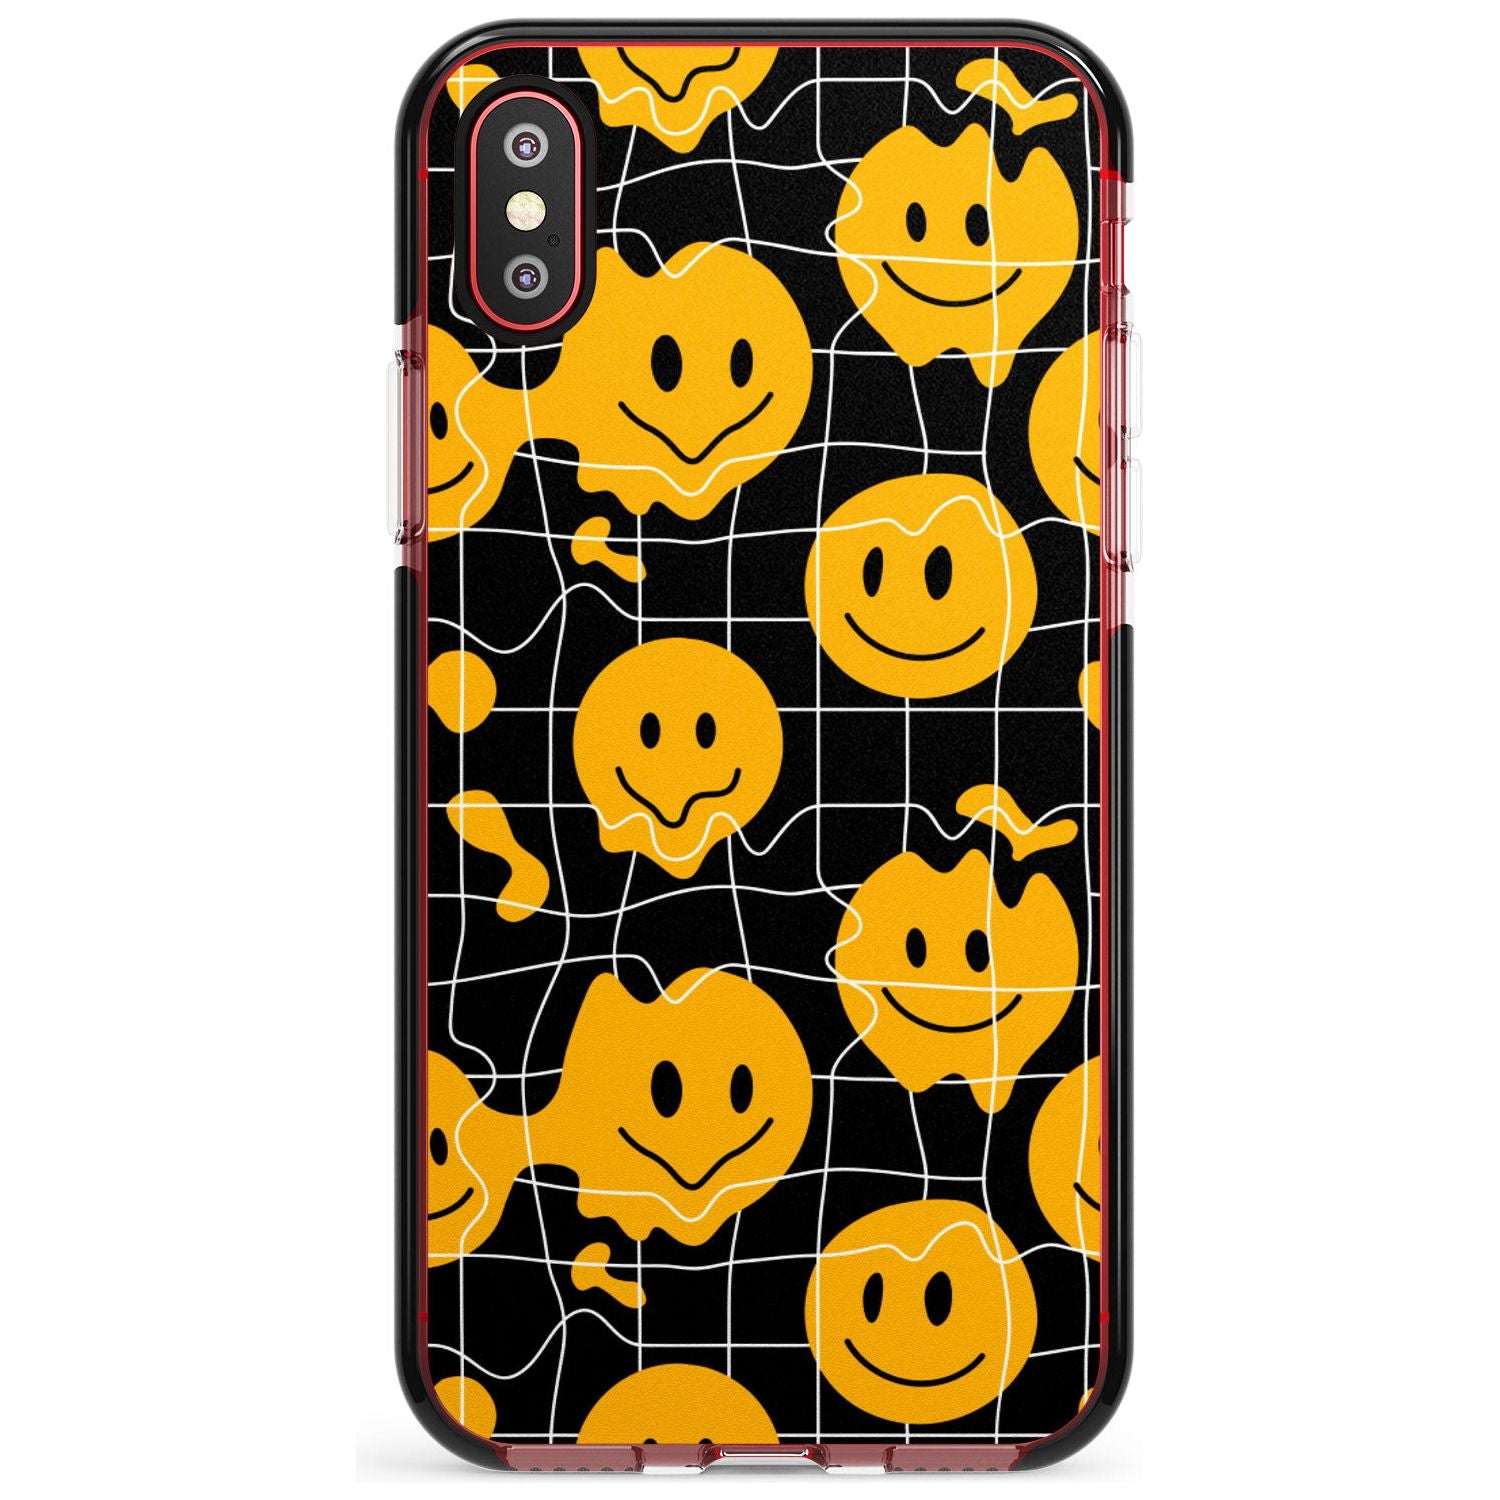 Acid Face Grid Pattern Black Impact Phone Case for iPhone X XS Max XR